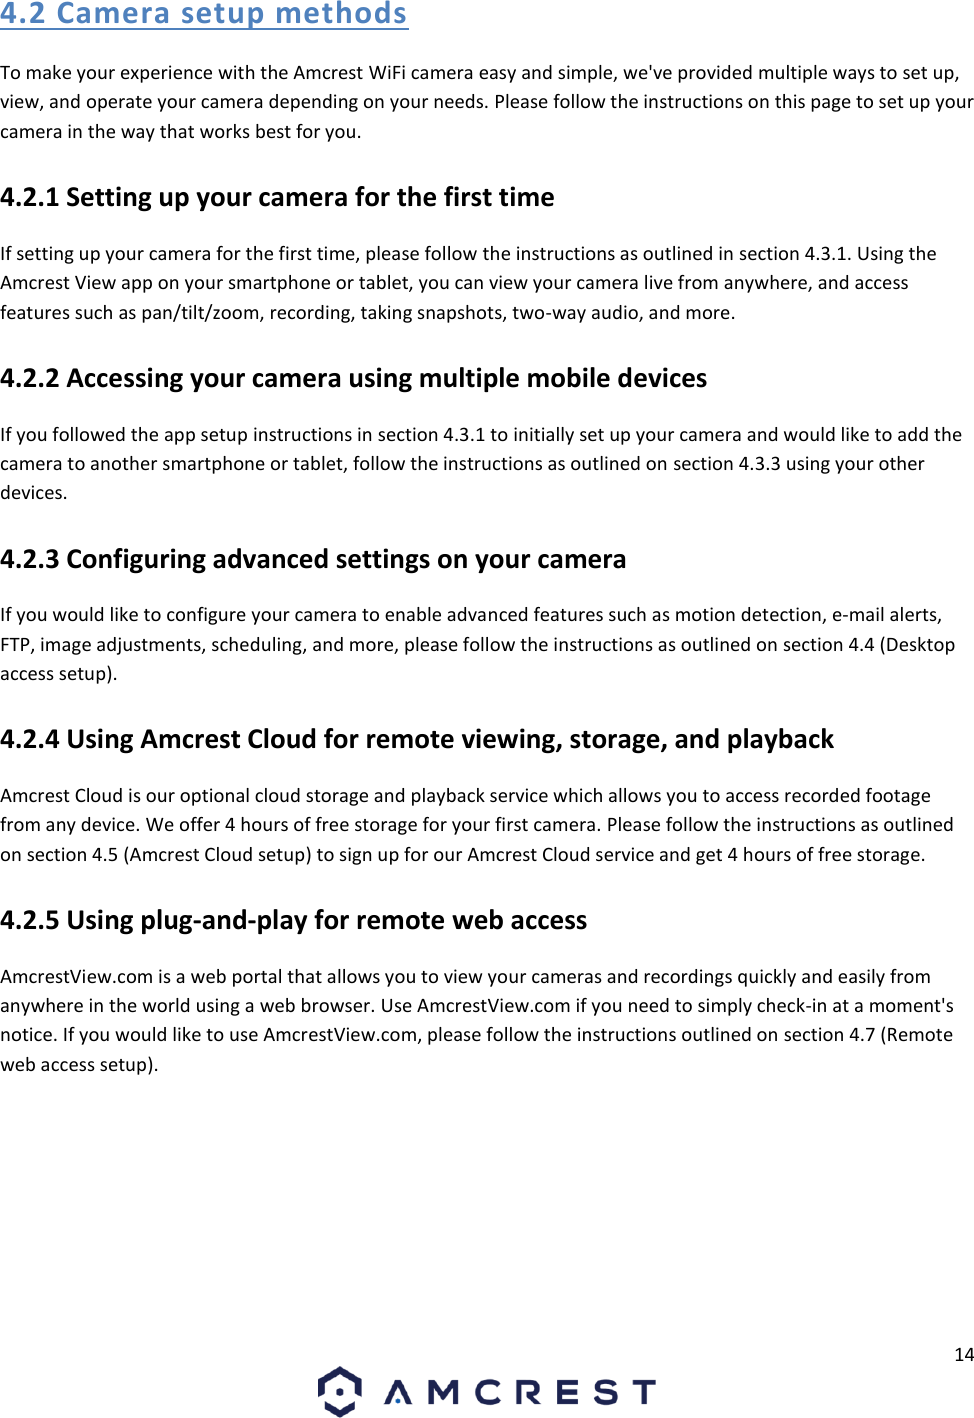 14  4.2 Camera setup methods To make your experience with the Amcrest WiFi camera easy and simple, we&apos;ve provided multiple ways to set up, view, and operate your camera depending on your needs. Please follow the instructions on this page to set up your camera in the way that works best for you. 4.2.1 Setting up your camera for the first time If setting up your camera for the first time, please follow the instructions as outlined in section 4.3.1. Using the Amcrest View app on your smartphone or tablet, you can view your camera live from anywhere, and access features such as pan/tilt/zoom, recording, taking snapshots, two-way audio, and more. 4.2.2 Accessing your camera using multiple mobile devices If you followed the app setup instructions in section 4.3.1 to initially set up your camera and would like to add the camera to another smartphone or tablet, follow the instructions as outlined on section 4.3.3 using your other devices. 4.2.3 Configuring advanced settings on your camera If you would like to configure your camera to enable advanced features such as motion detection, e-mail alerts, FTP, image adjustments, scheduling, and more, please follow the instructions as outlined on section 4.4 (Desktop access setup). 4.2.4 Using Amcrest Cloud for remote viewing, storage, and playback Amcrest Cloud is our optional cloud storage and playback service which allows you to access recorded footage from any device. We offer 4 hours of free storage for your first camera. Please follow the instructions as outlined on section 4.5 (Amcrest Cloud setup) to sign up for our Amcrest Cloud service and get 4 hours of free storage. 4.2.5 Using plug-and-play for remote web access AmcrestView.com is a web portal that allows you to view your cameras and recordings quickly and easily from anywhere in the world using a web browser. Use AmcrestView.com if you need to simply check-in at a moment&apos;s notice. If you would like to use AmcrestView.com, please follow the instructions outlined on section 4.7 (Remote web access setup).    